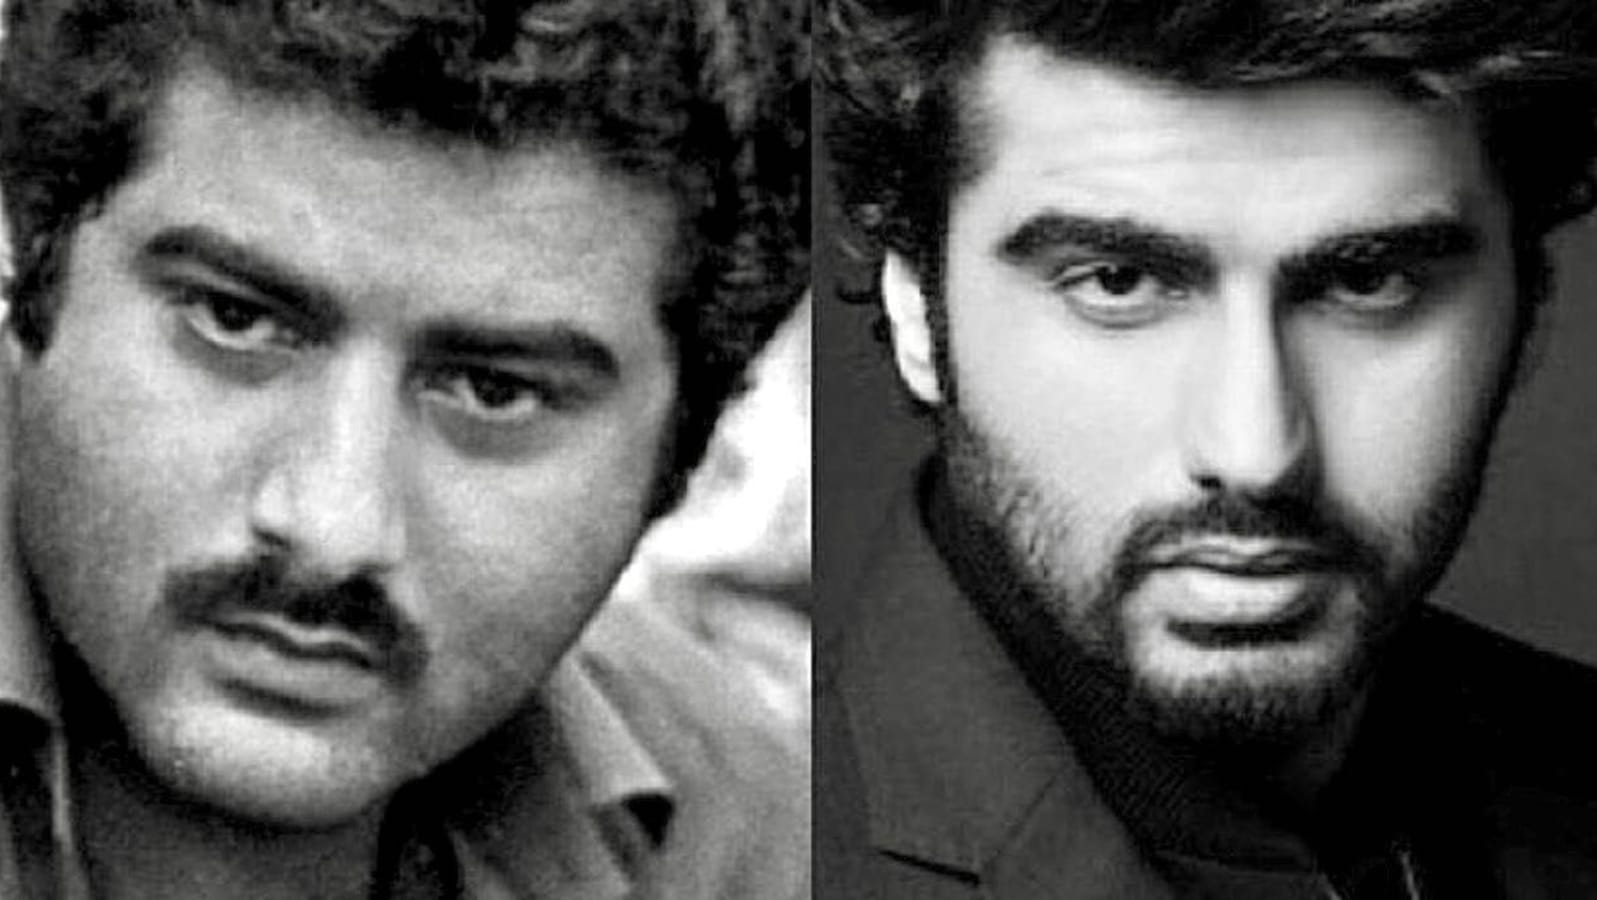 Arjun Kapoor reacts to dad Boney Kapoor calling him ‘better looking’ than him: ‘After your debut we’ll have competition’